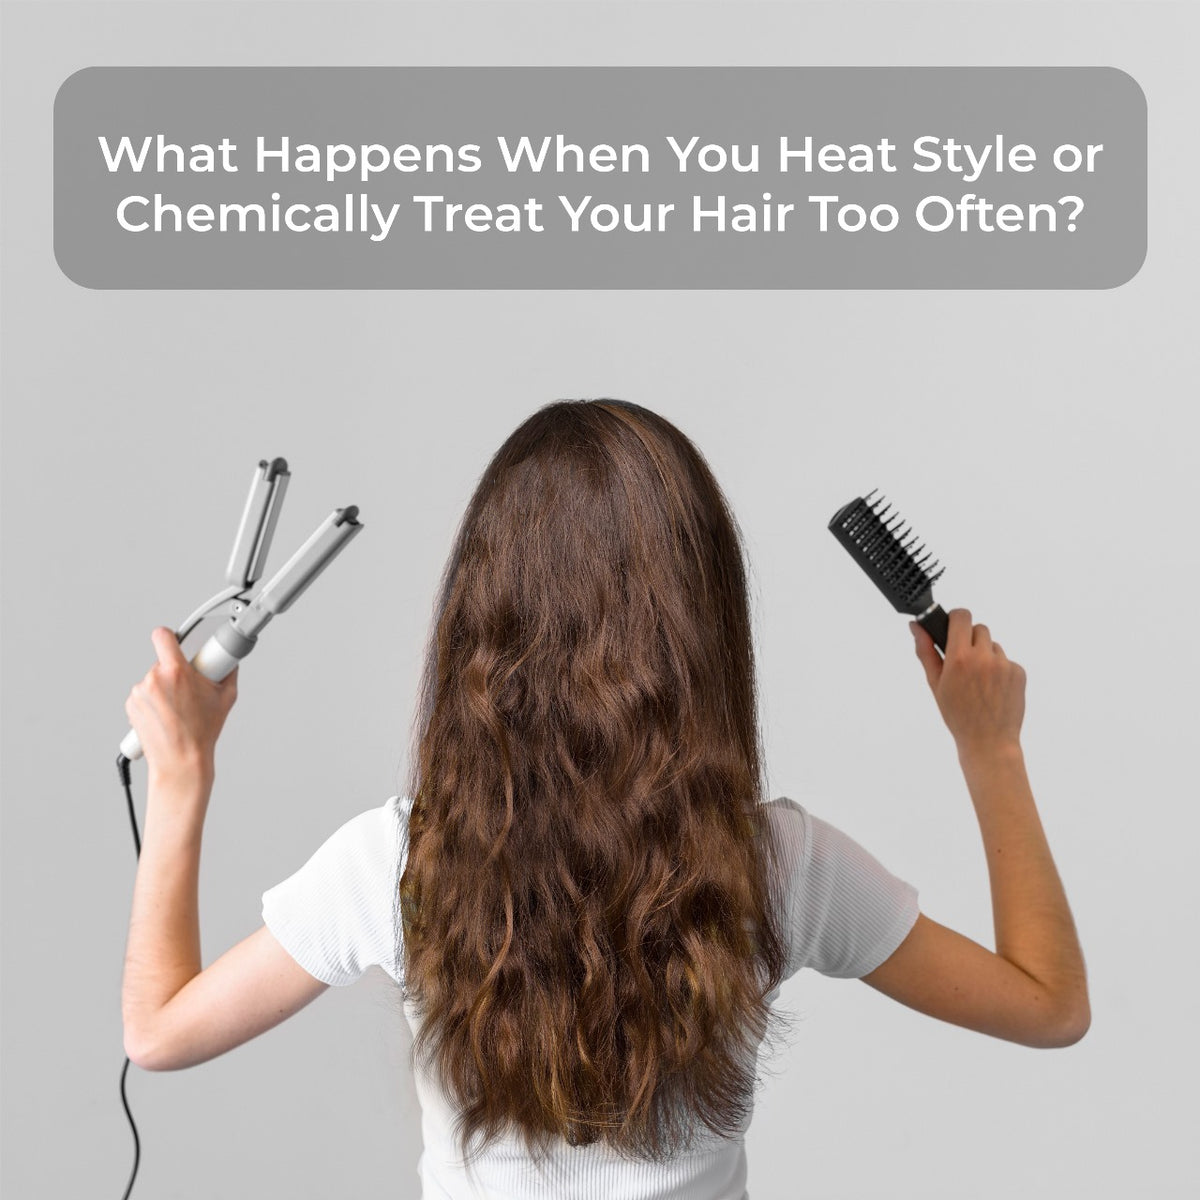 What Happens When You Heat Style or Chemically Treat Your Hair Too Often?